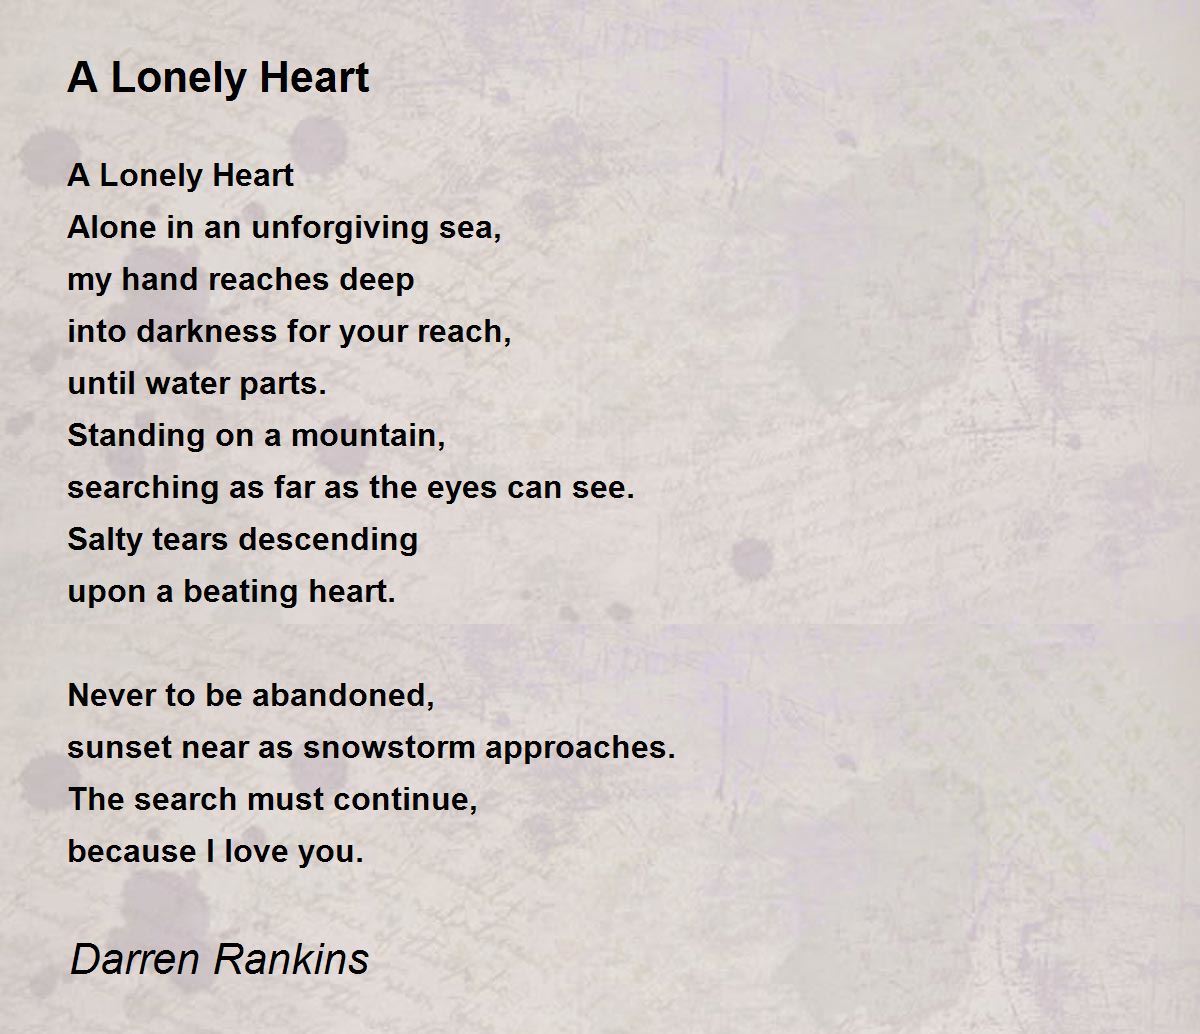 A Lonely Heart - A Lonely Heart Poem by Darren Rankins